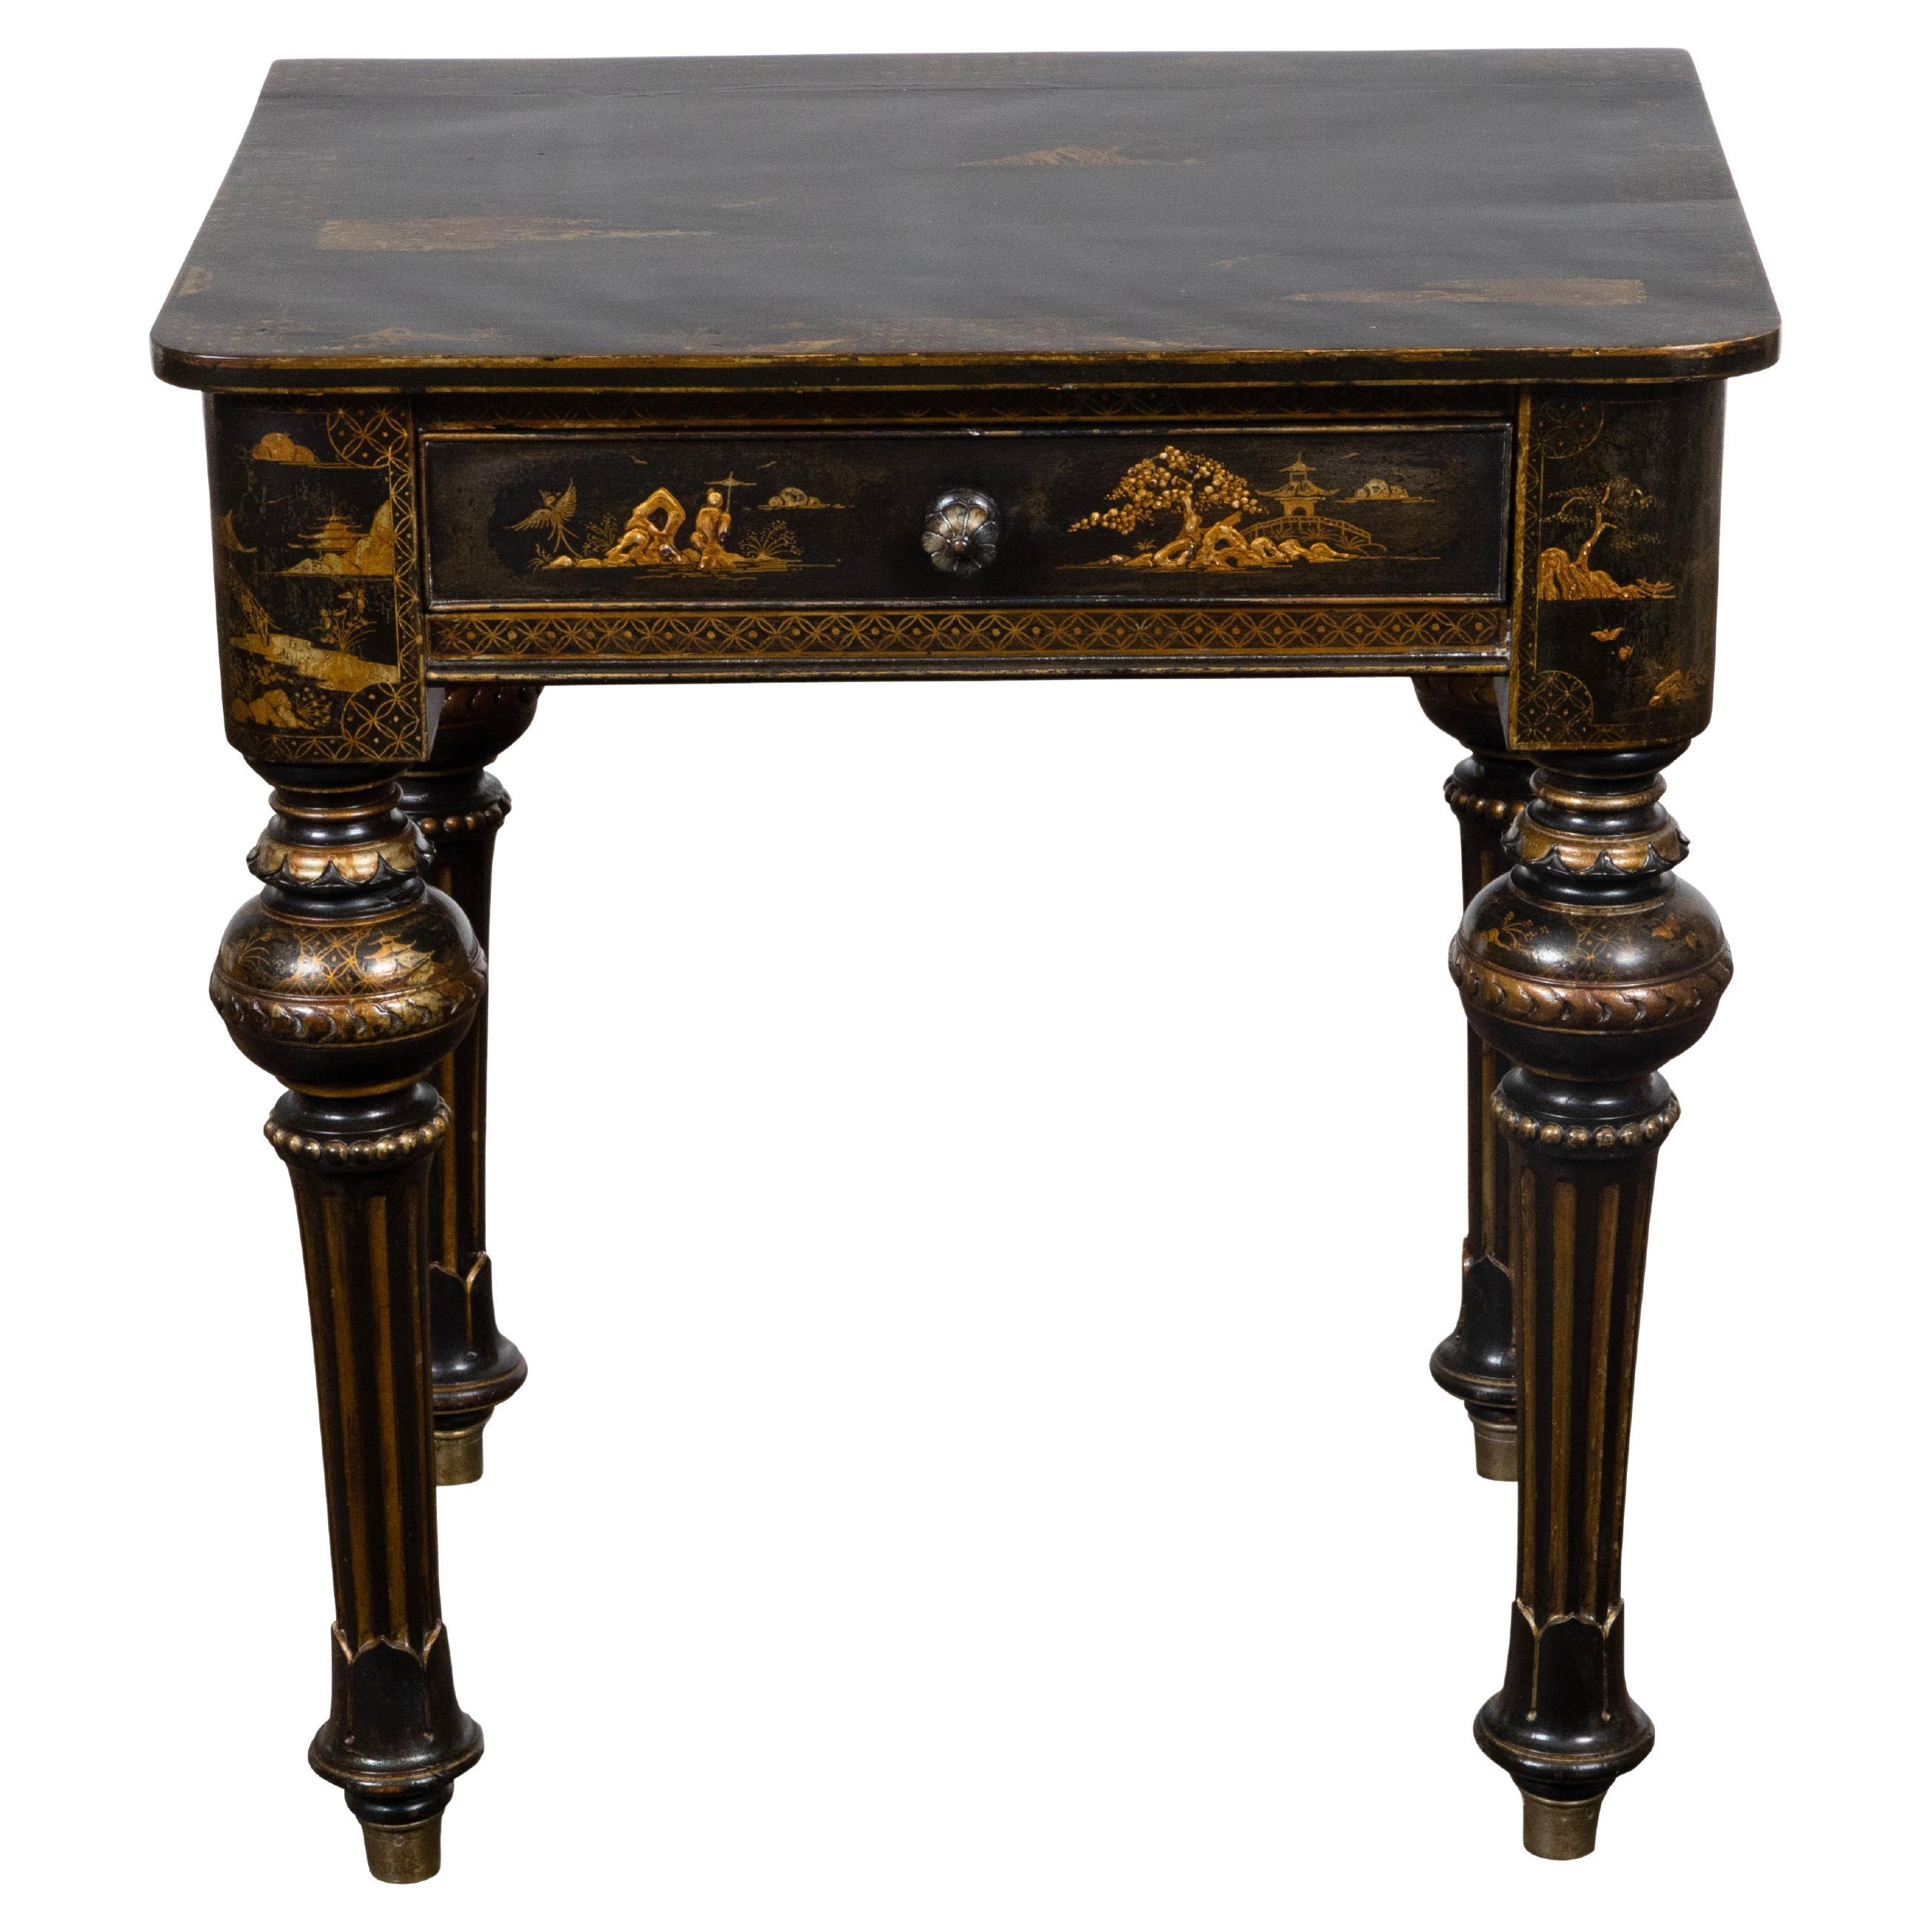 English 1880s Black and Gold Japanned Side Table with Chinoiserie Décor For Sale